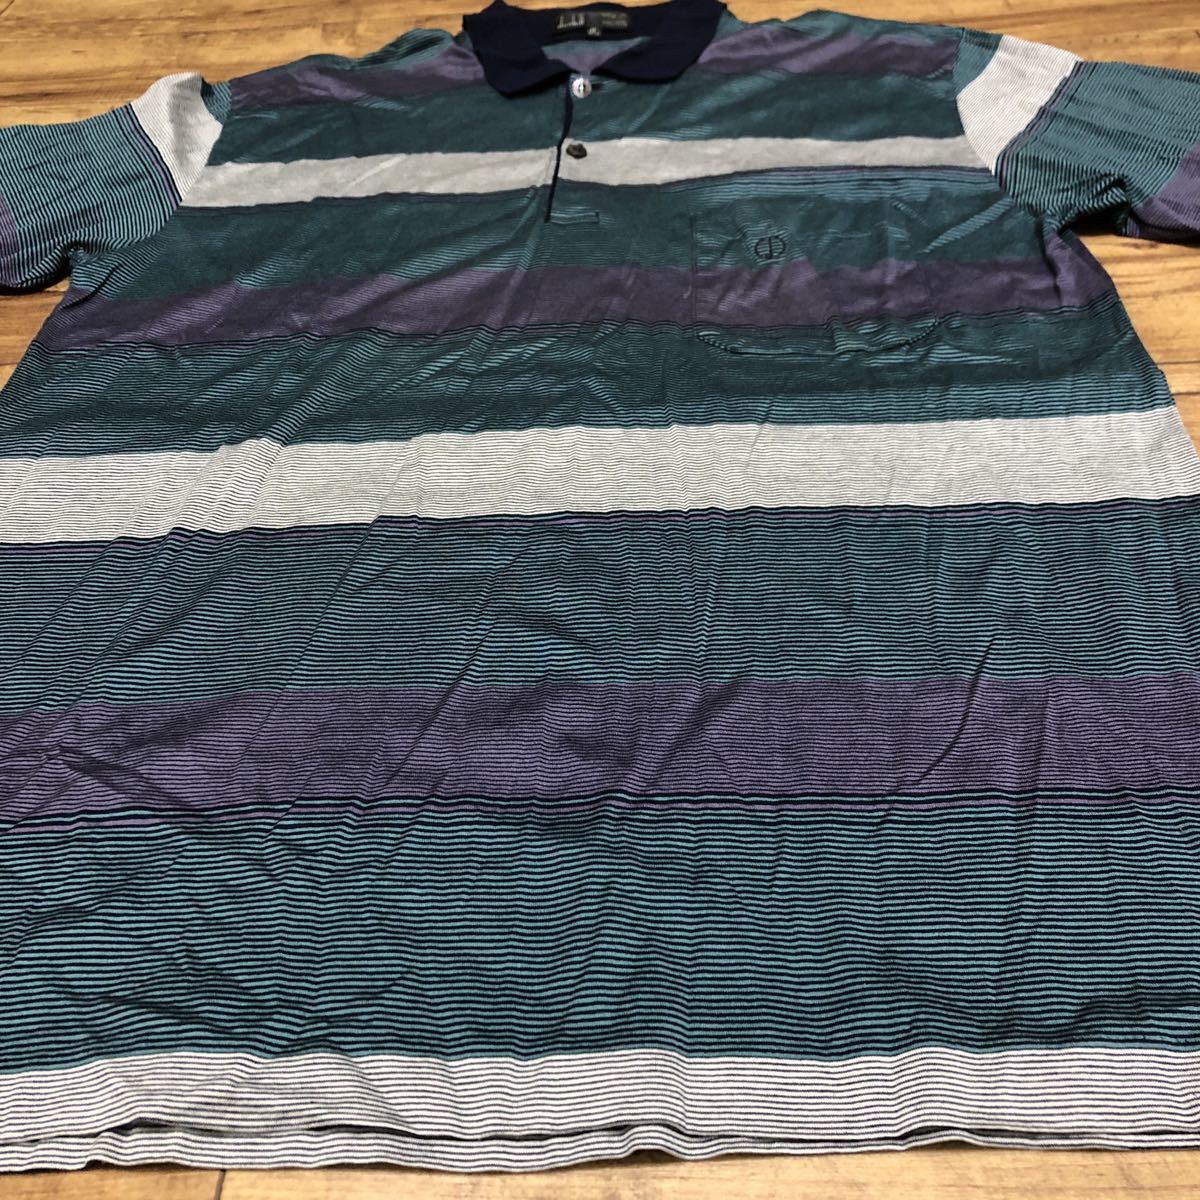 * Dunhill dunhill polo-shirt with short sleeves border pattern green group cotton Italy made size inscription 42 107.